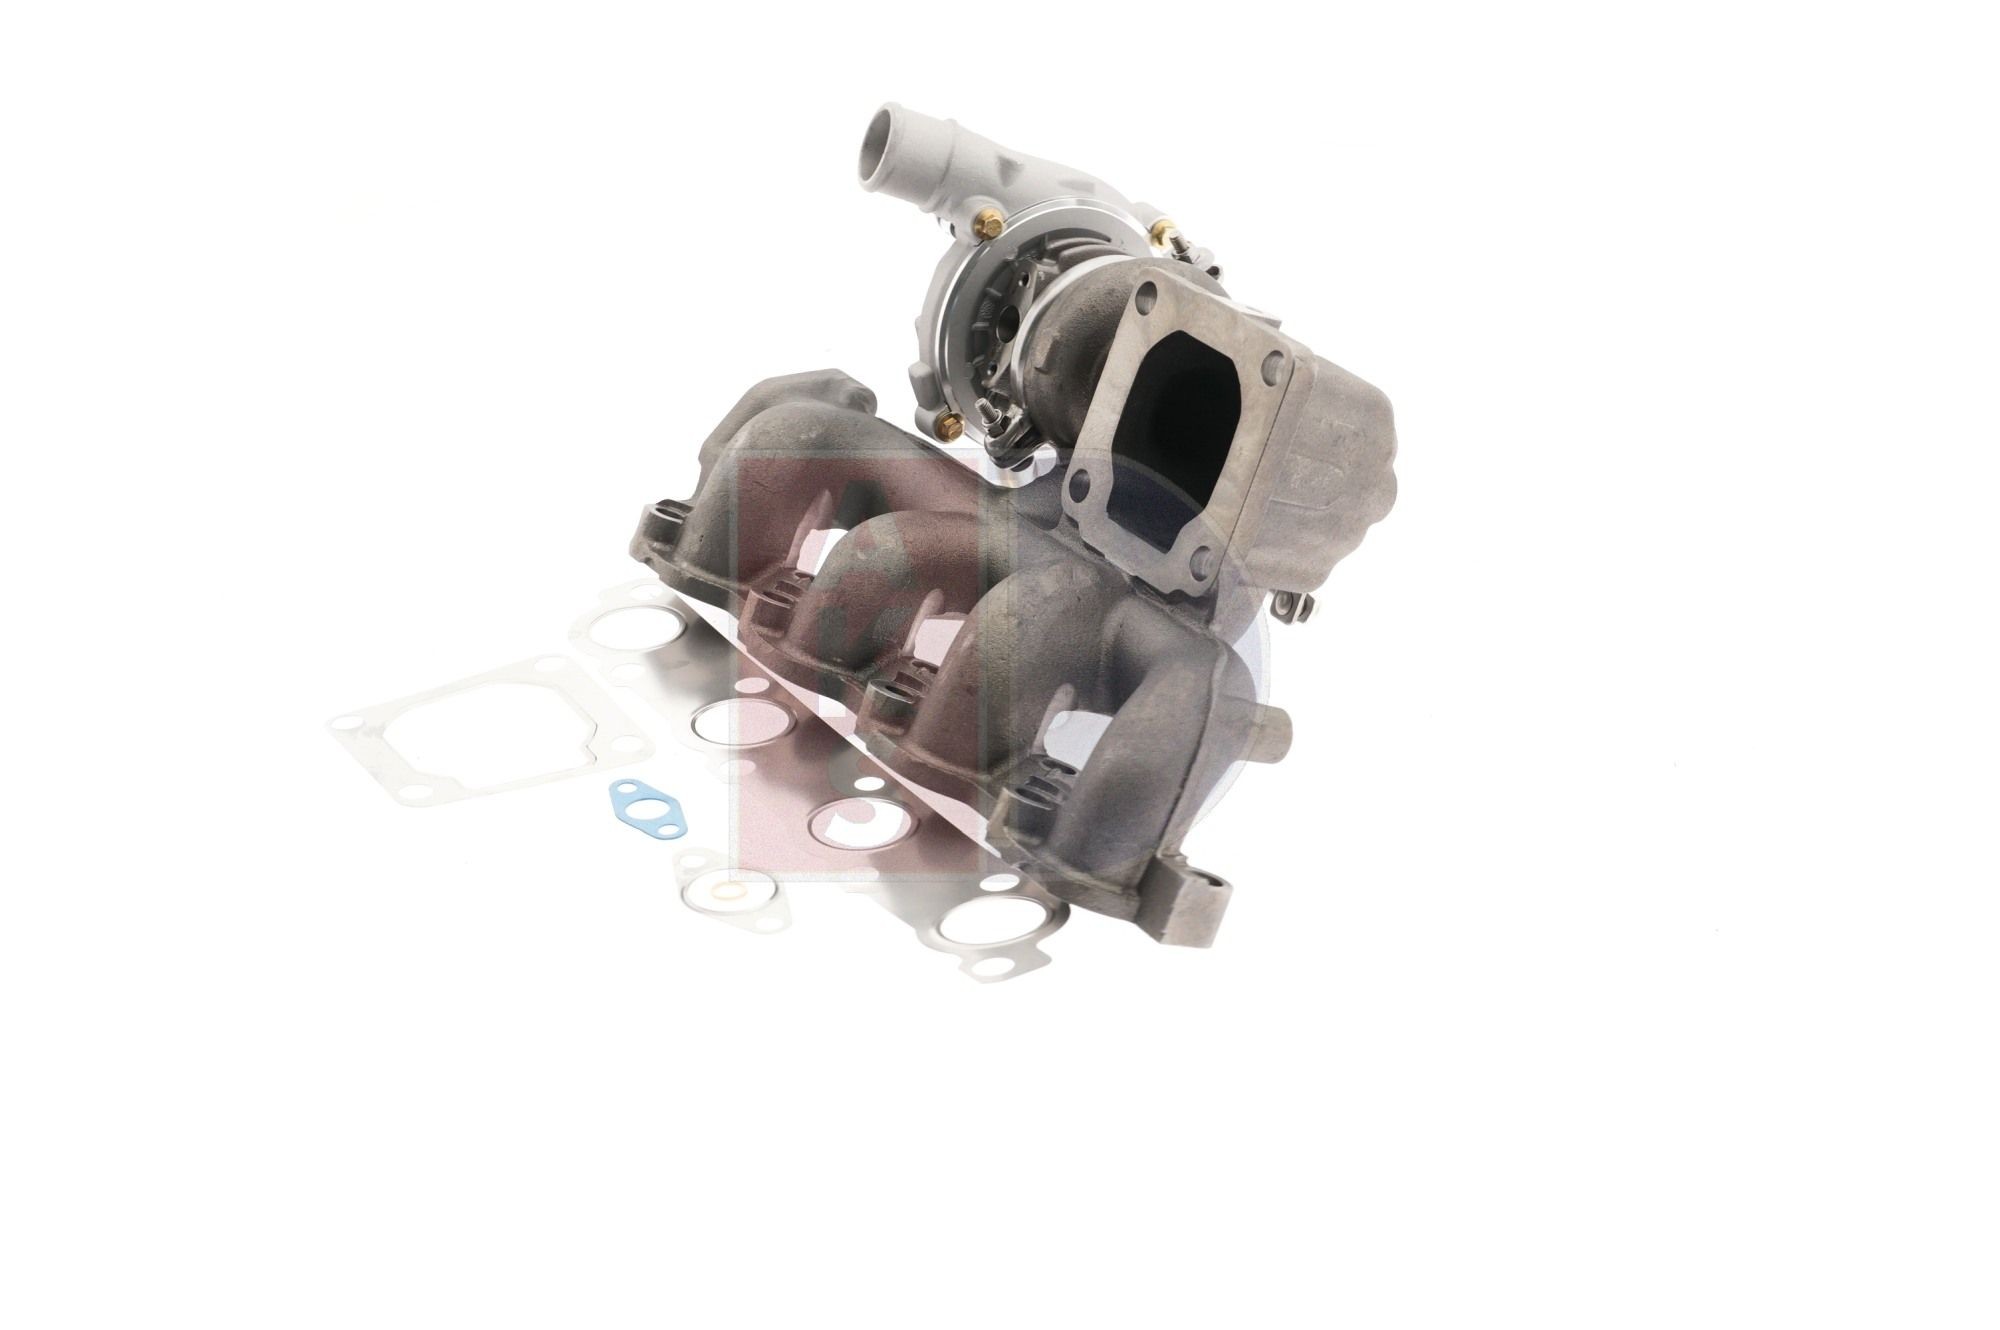 095020N Turbocharger 095020N AKS DASIS Exhaust Turbocharger, with gaskets/seals